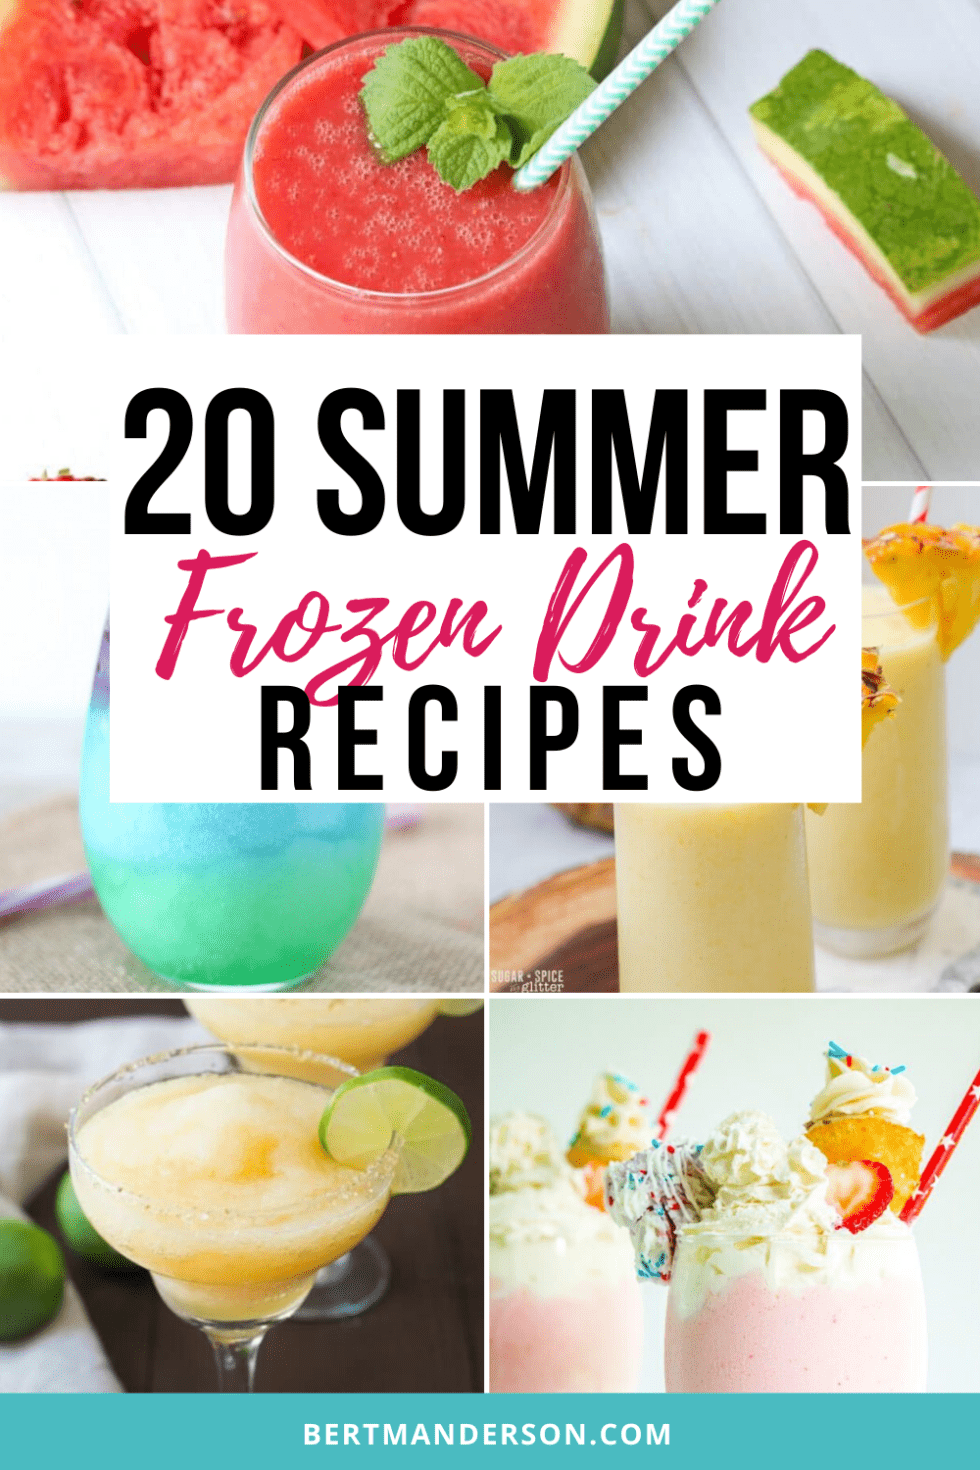 20 Refreshing Summer Frozen Drink Recipes to Try This Summer